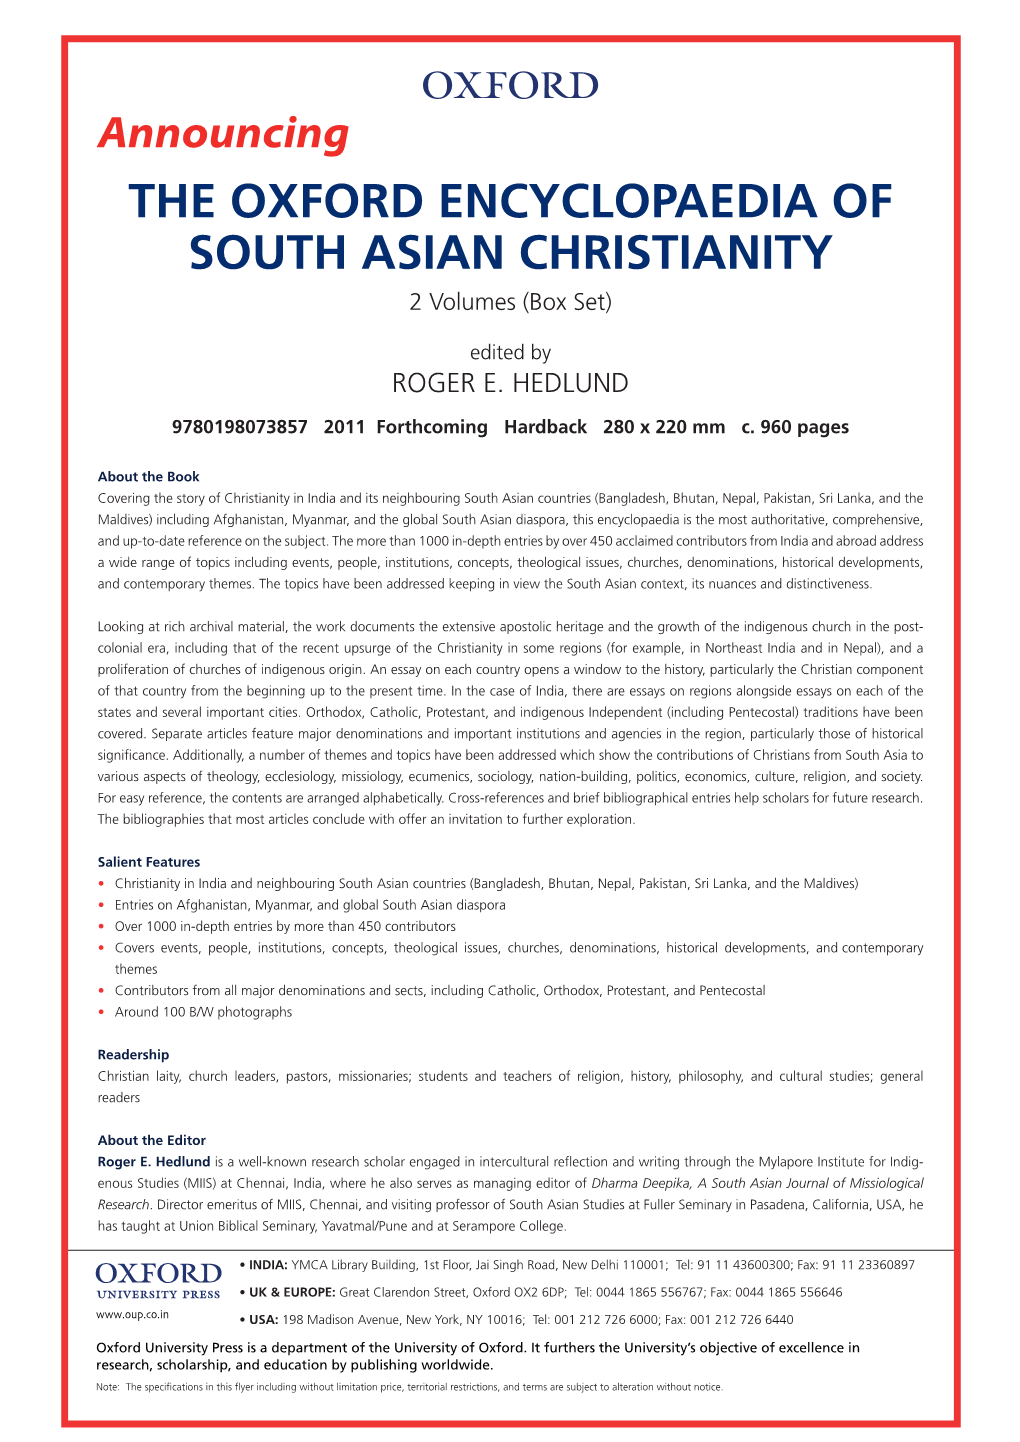 THE OXFORD ENCYCLOPAEDIA of SOUTH ASIAN CHRISTIANITY 2 Volumes (Box Set)